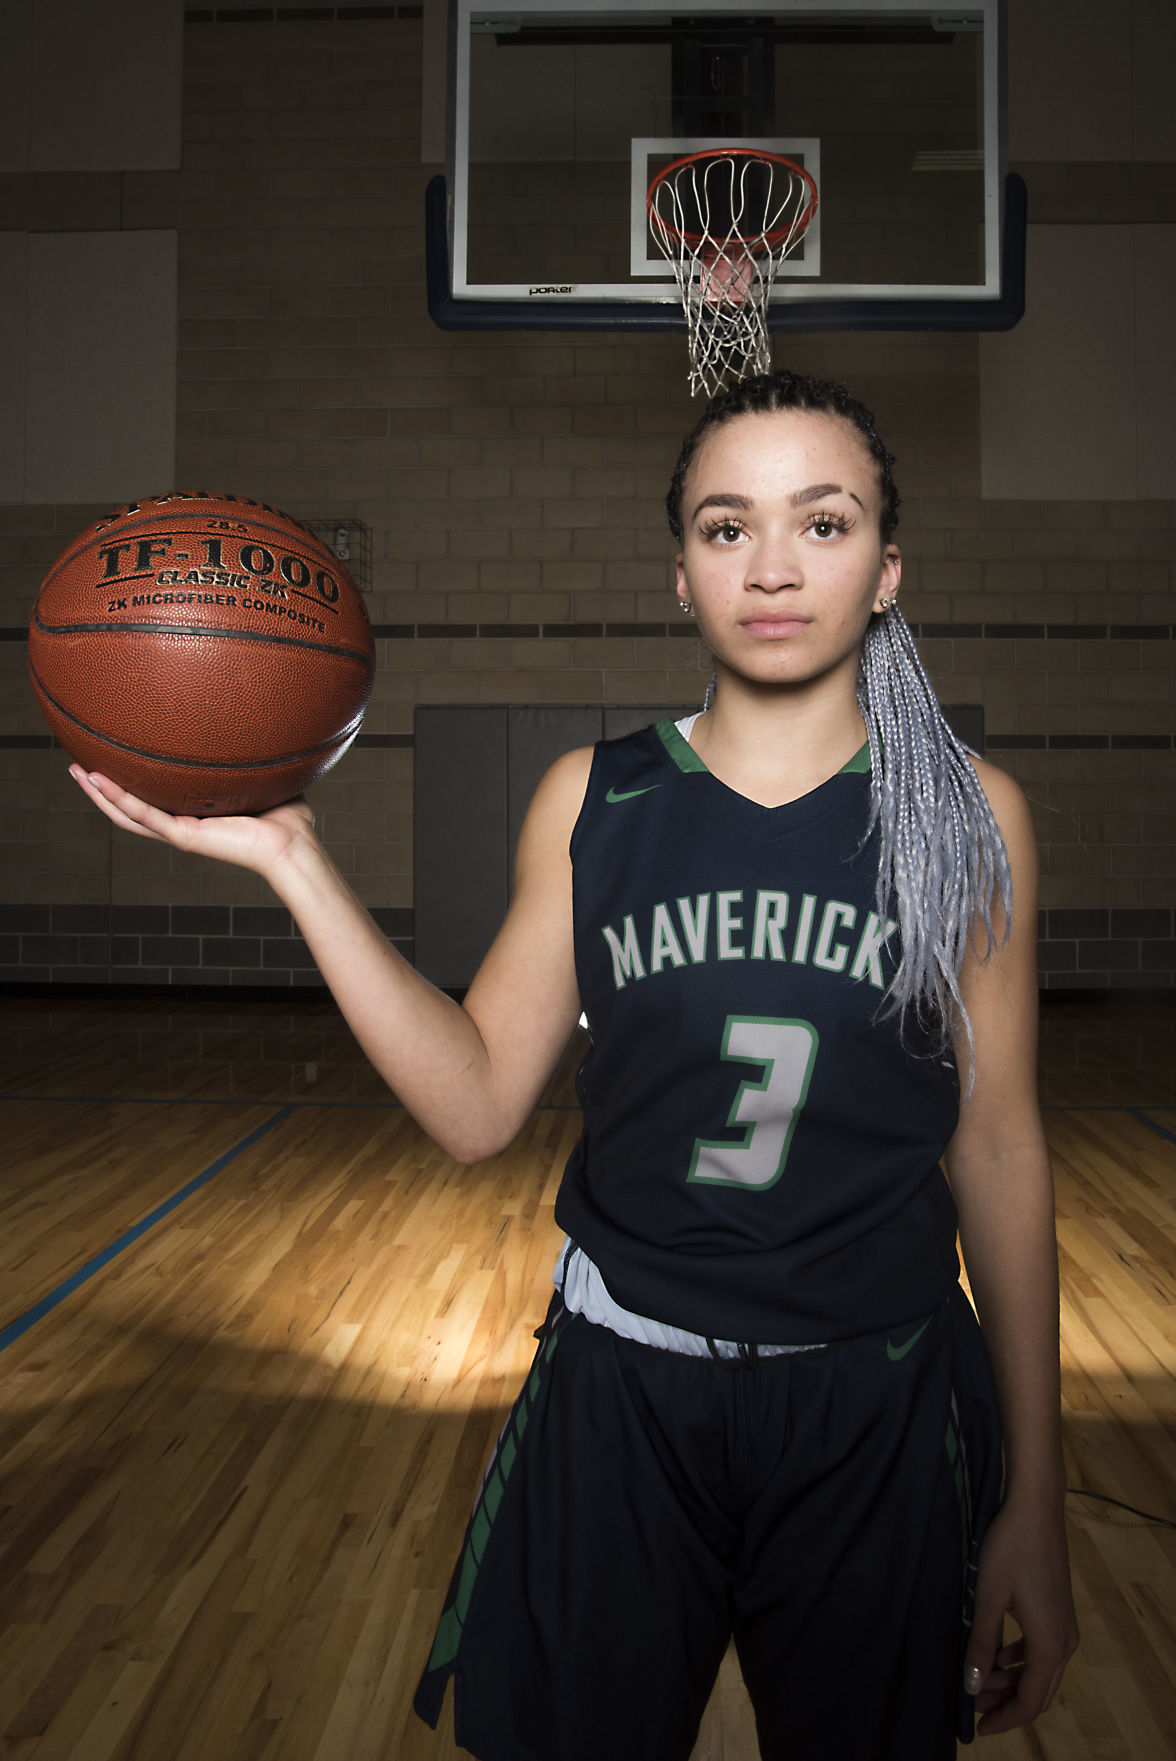 Mountain View’s Darian White used basketball to overcome personal